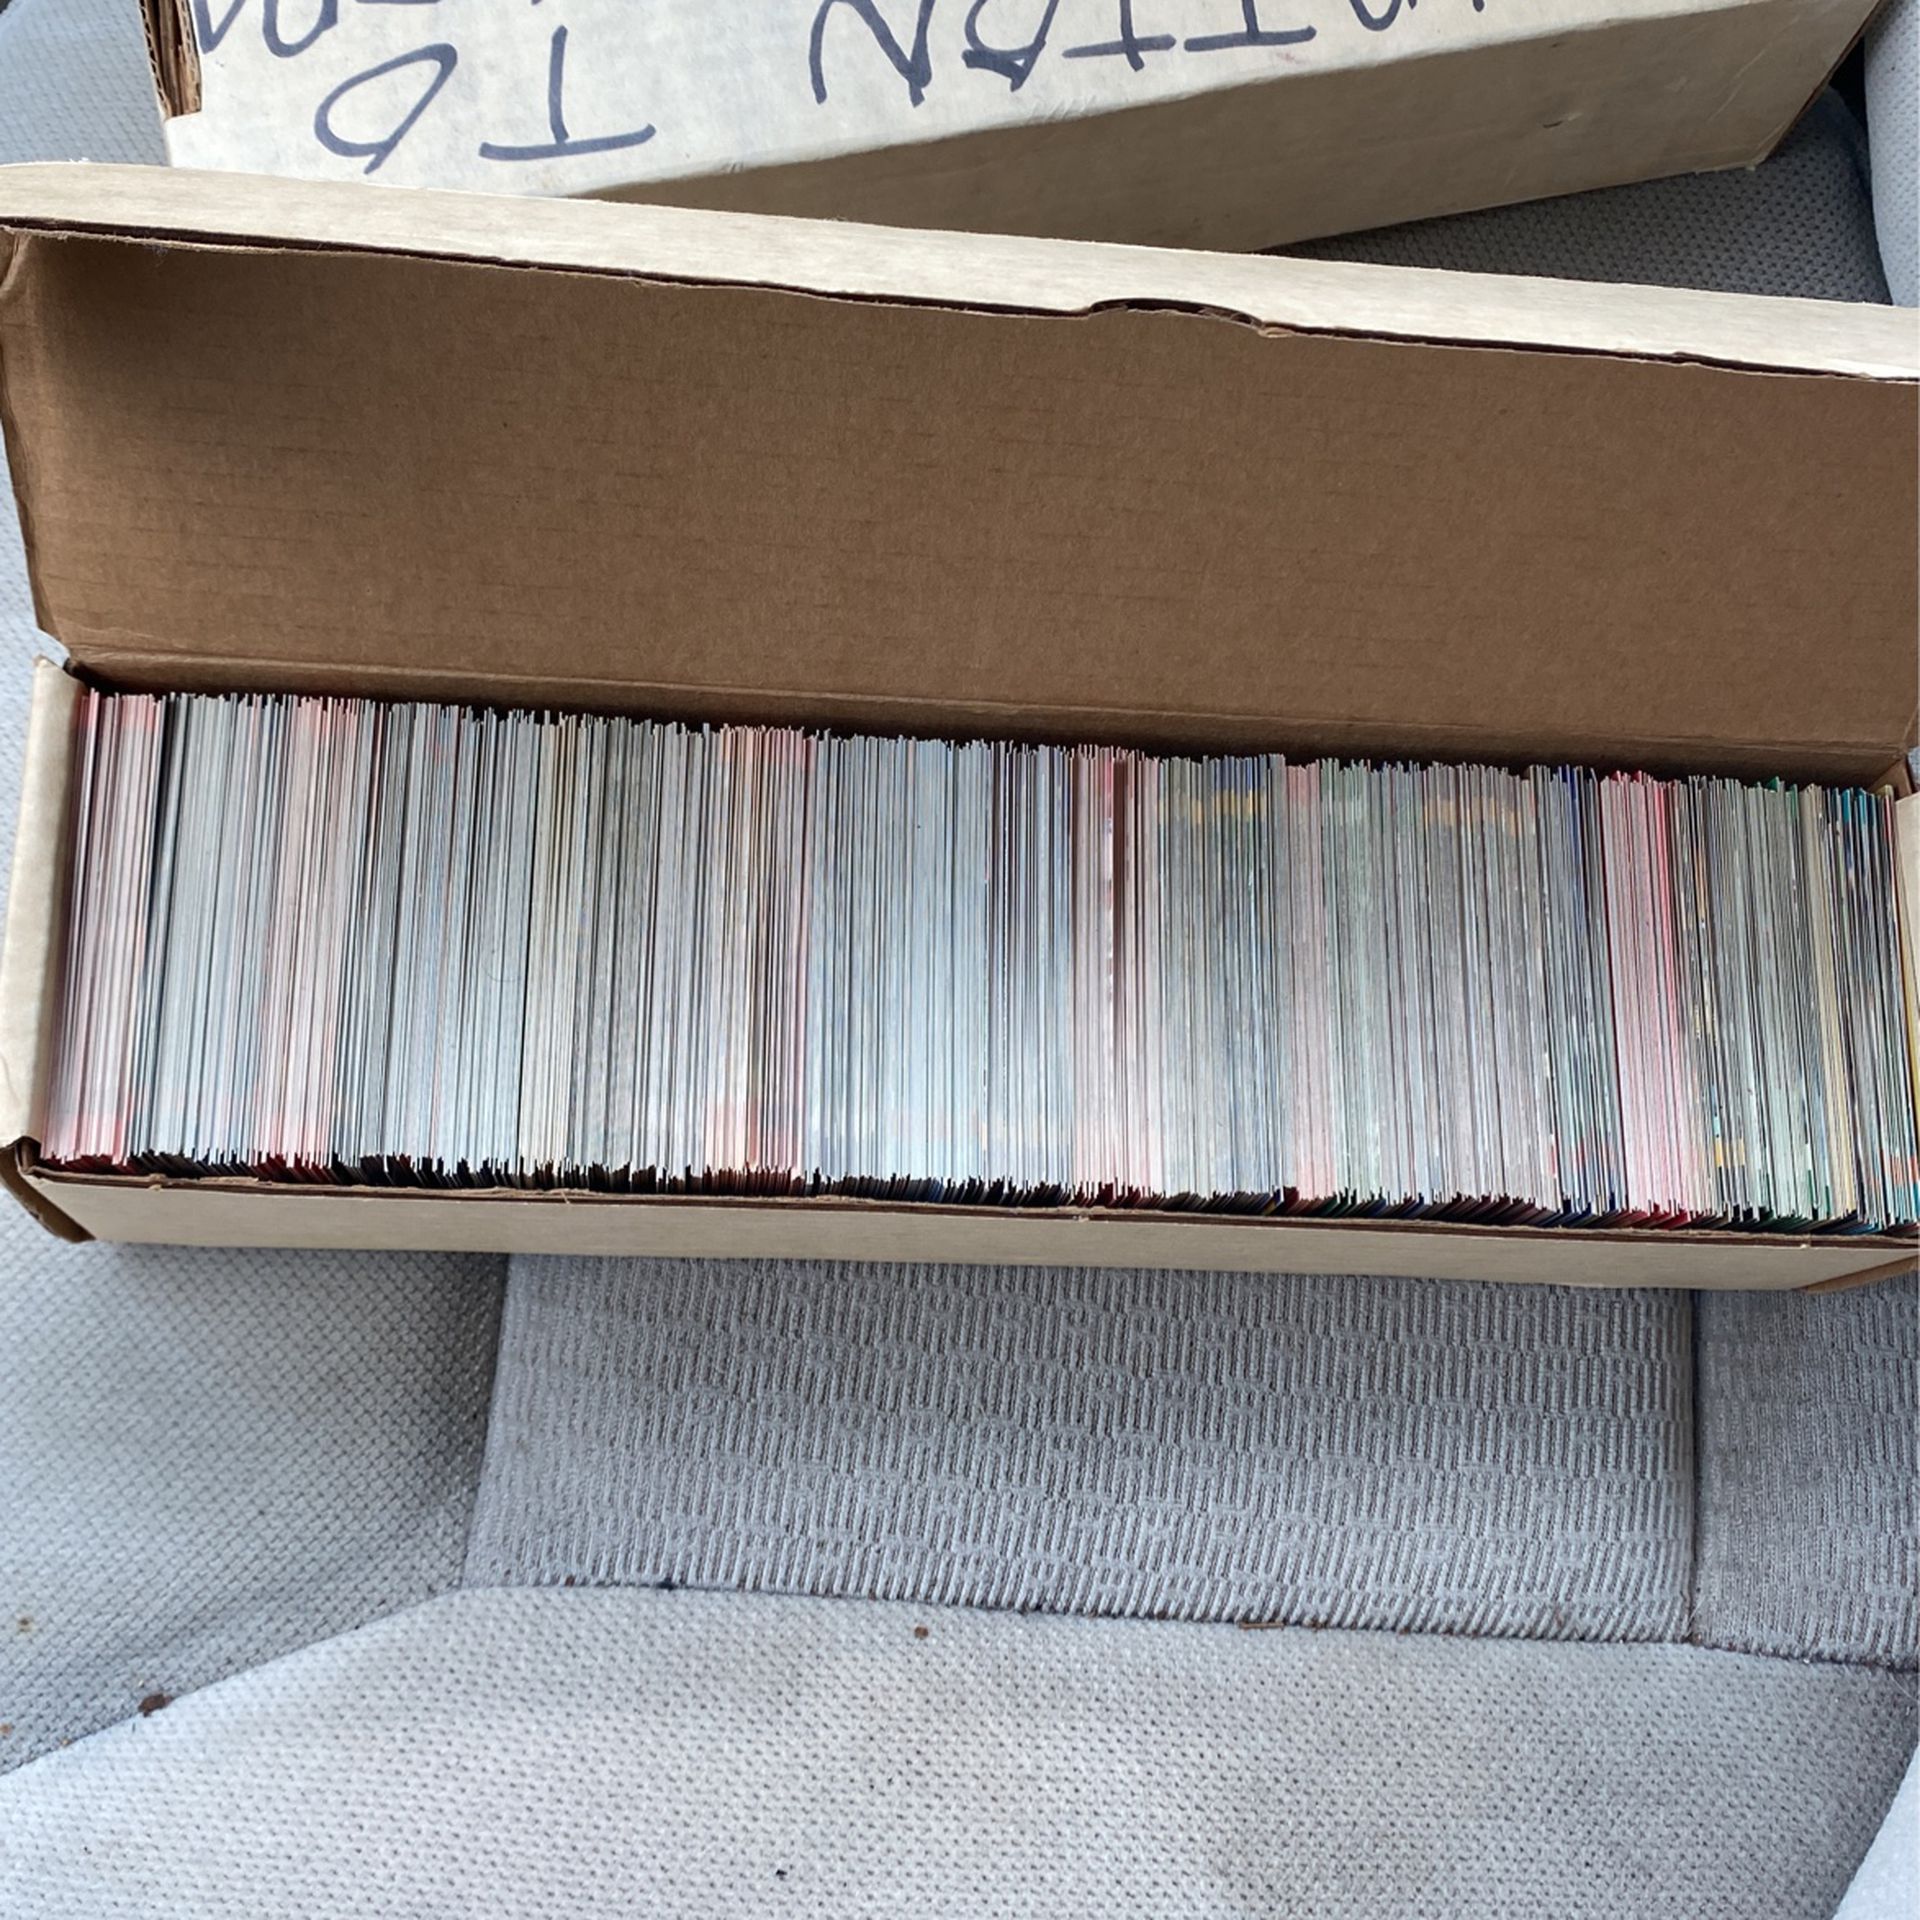 1990 NFL Cards And 1992 Fleer Cello Baseball Cards